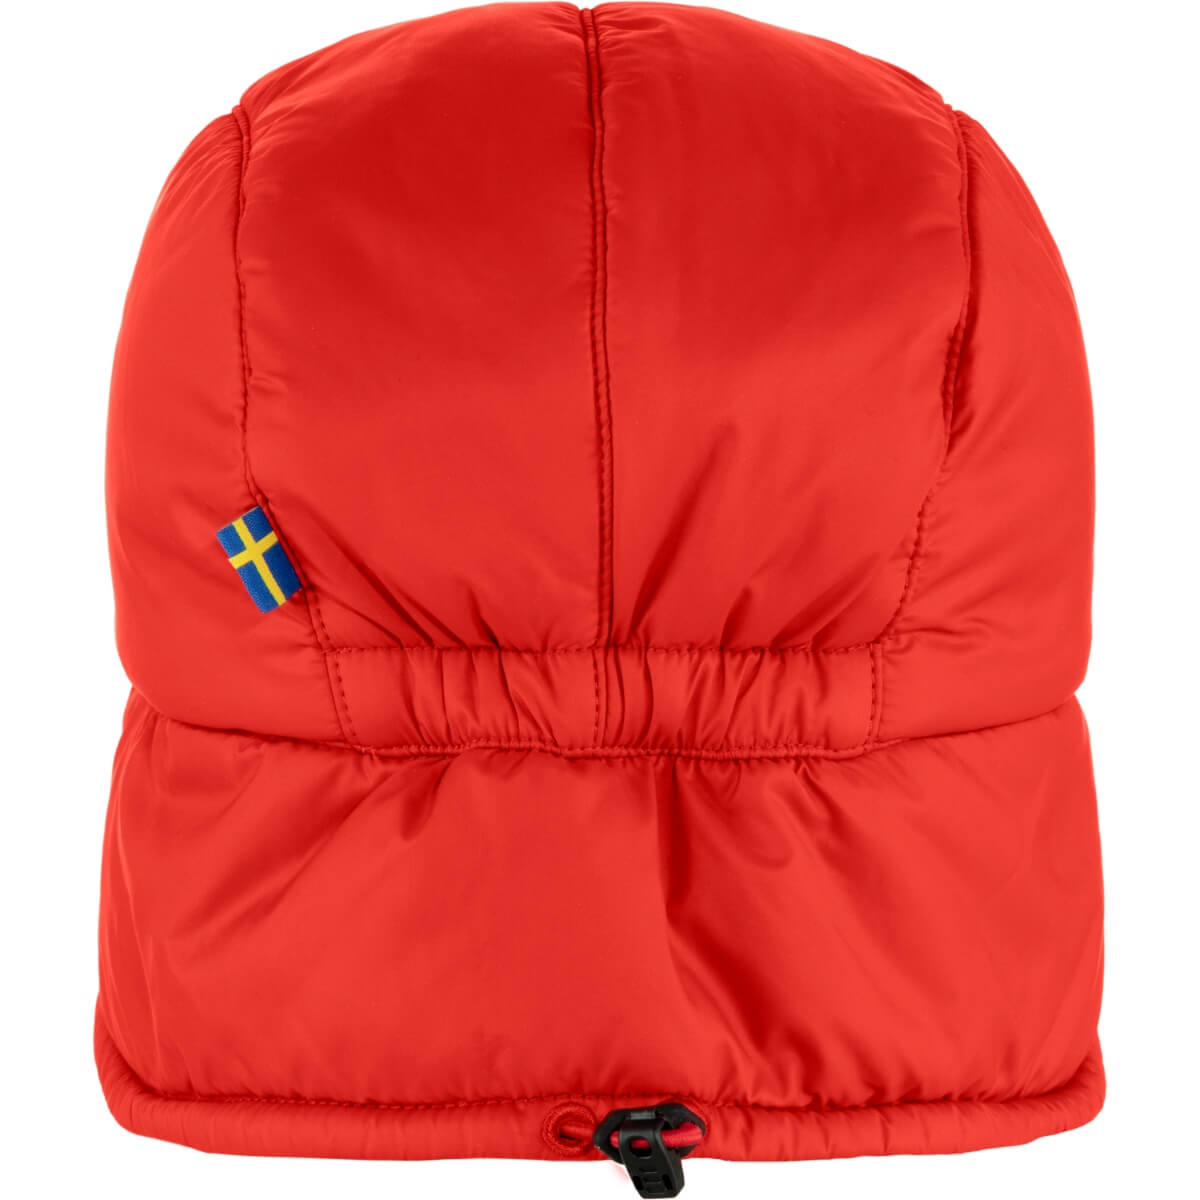 Expedition Padded Cap